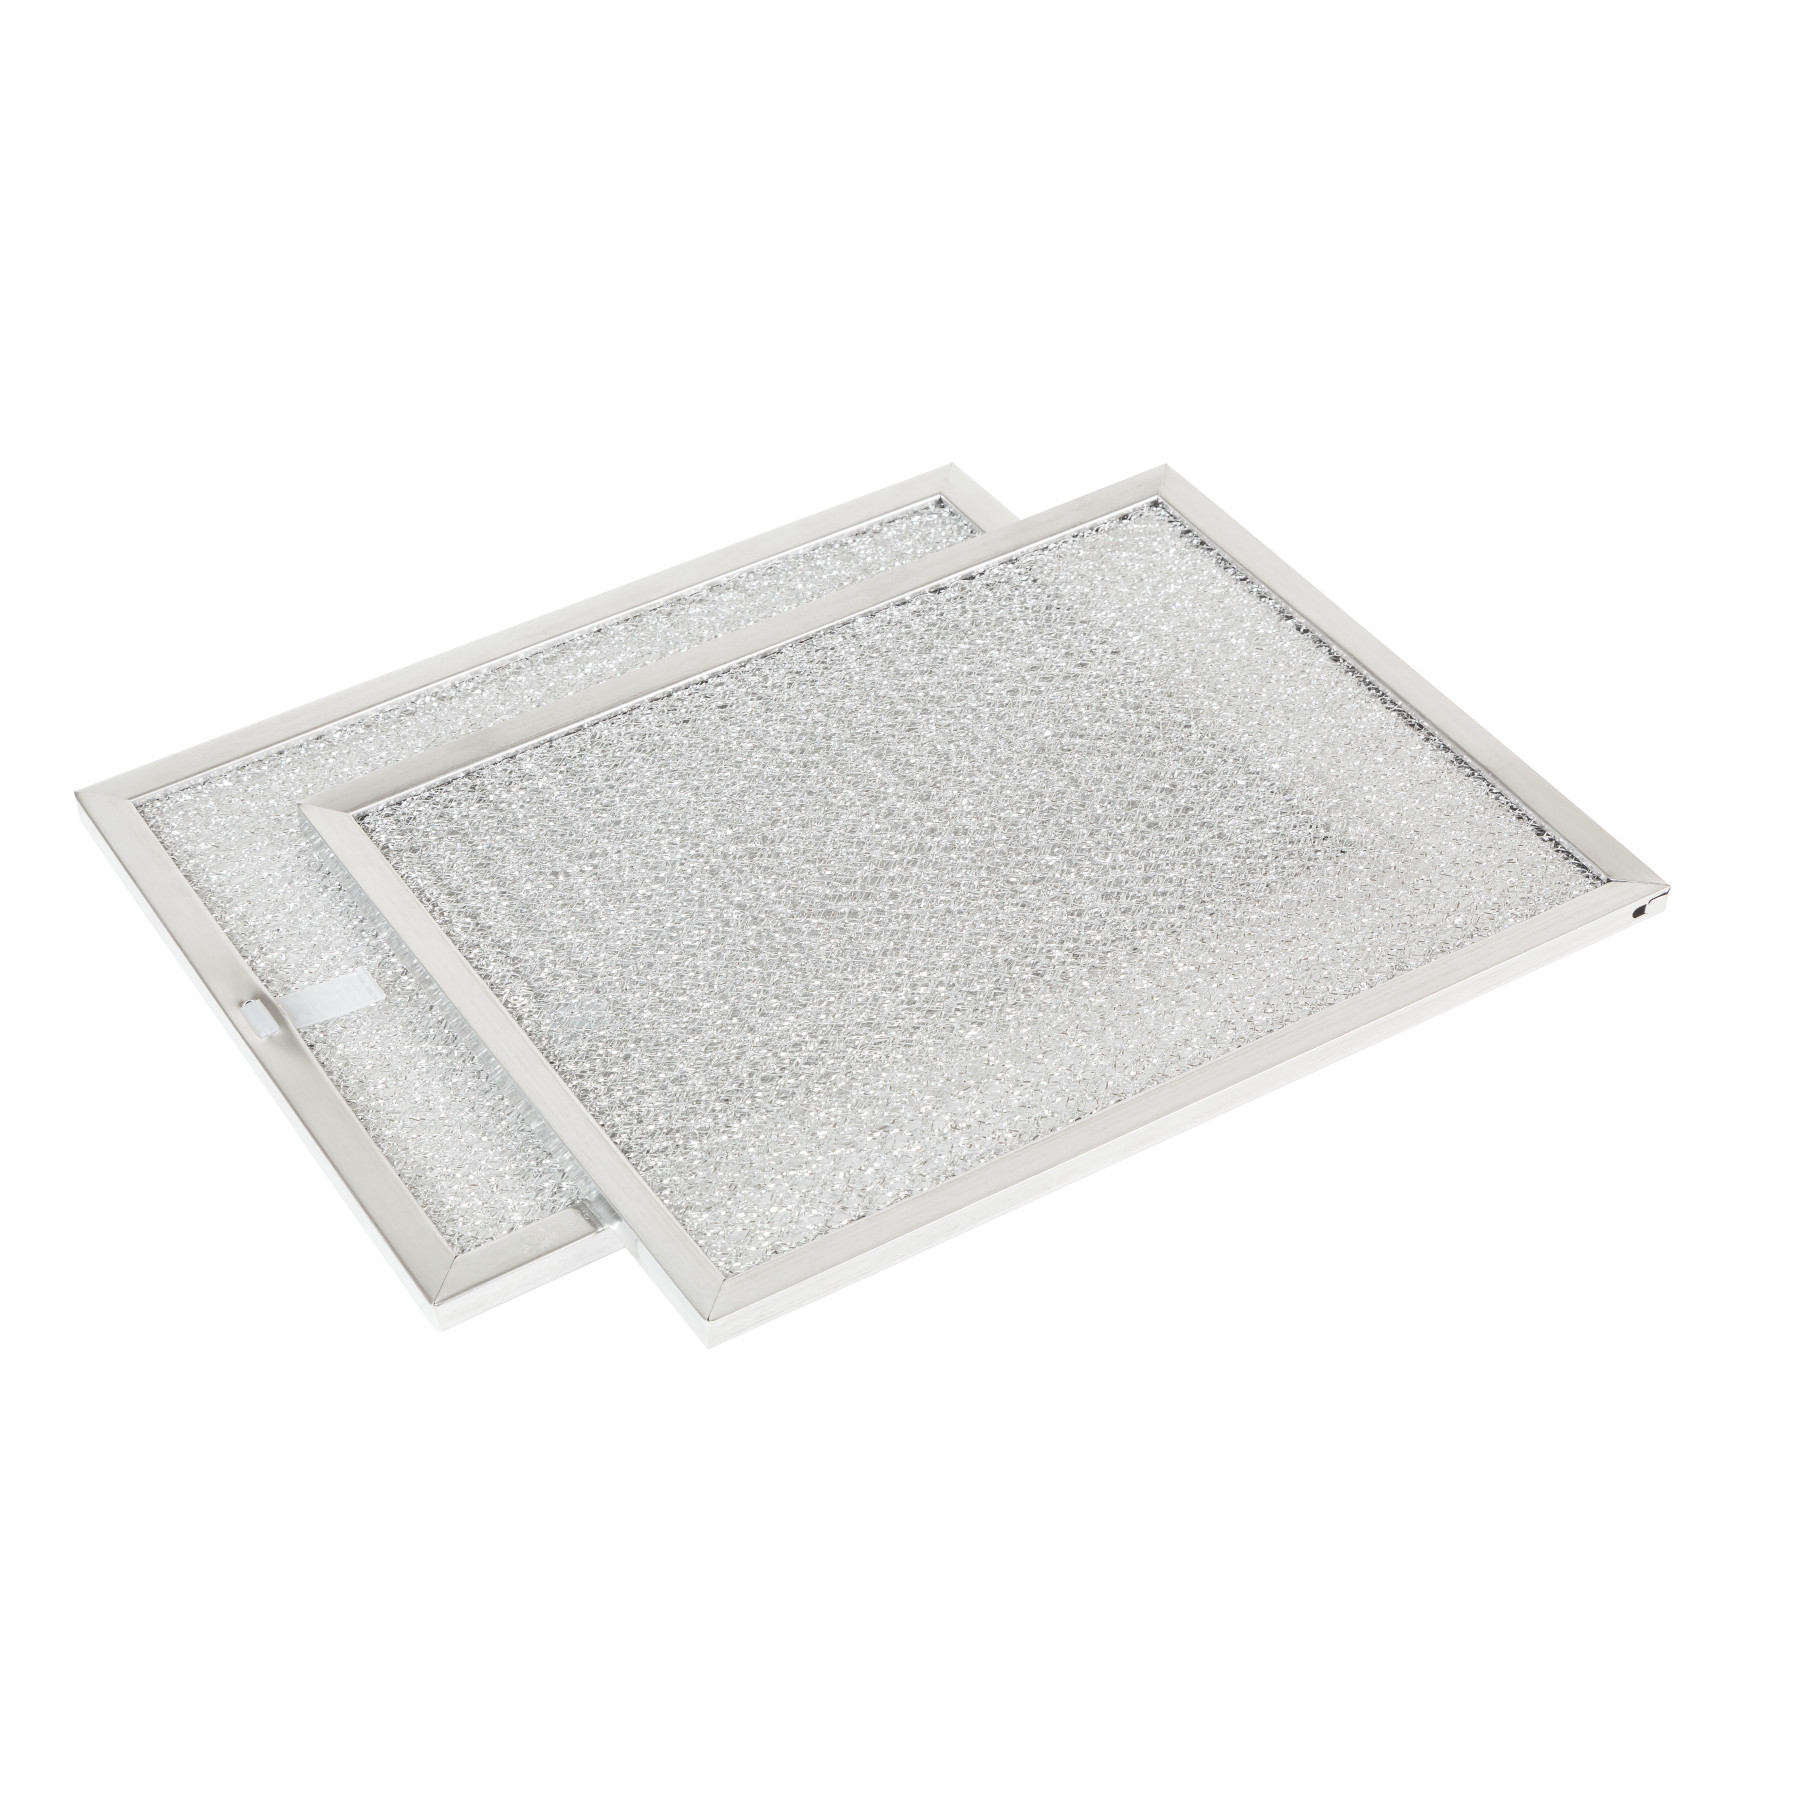 Broan BP29 Replacement Filter for Range Hood Aluminum 8-3/4 by 10-1/2-Inch 